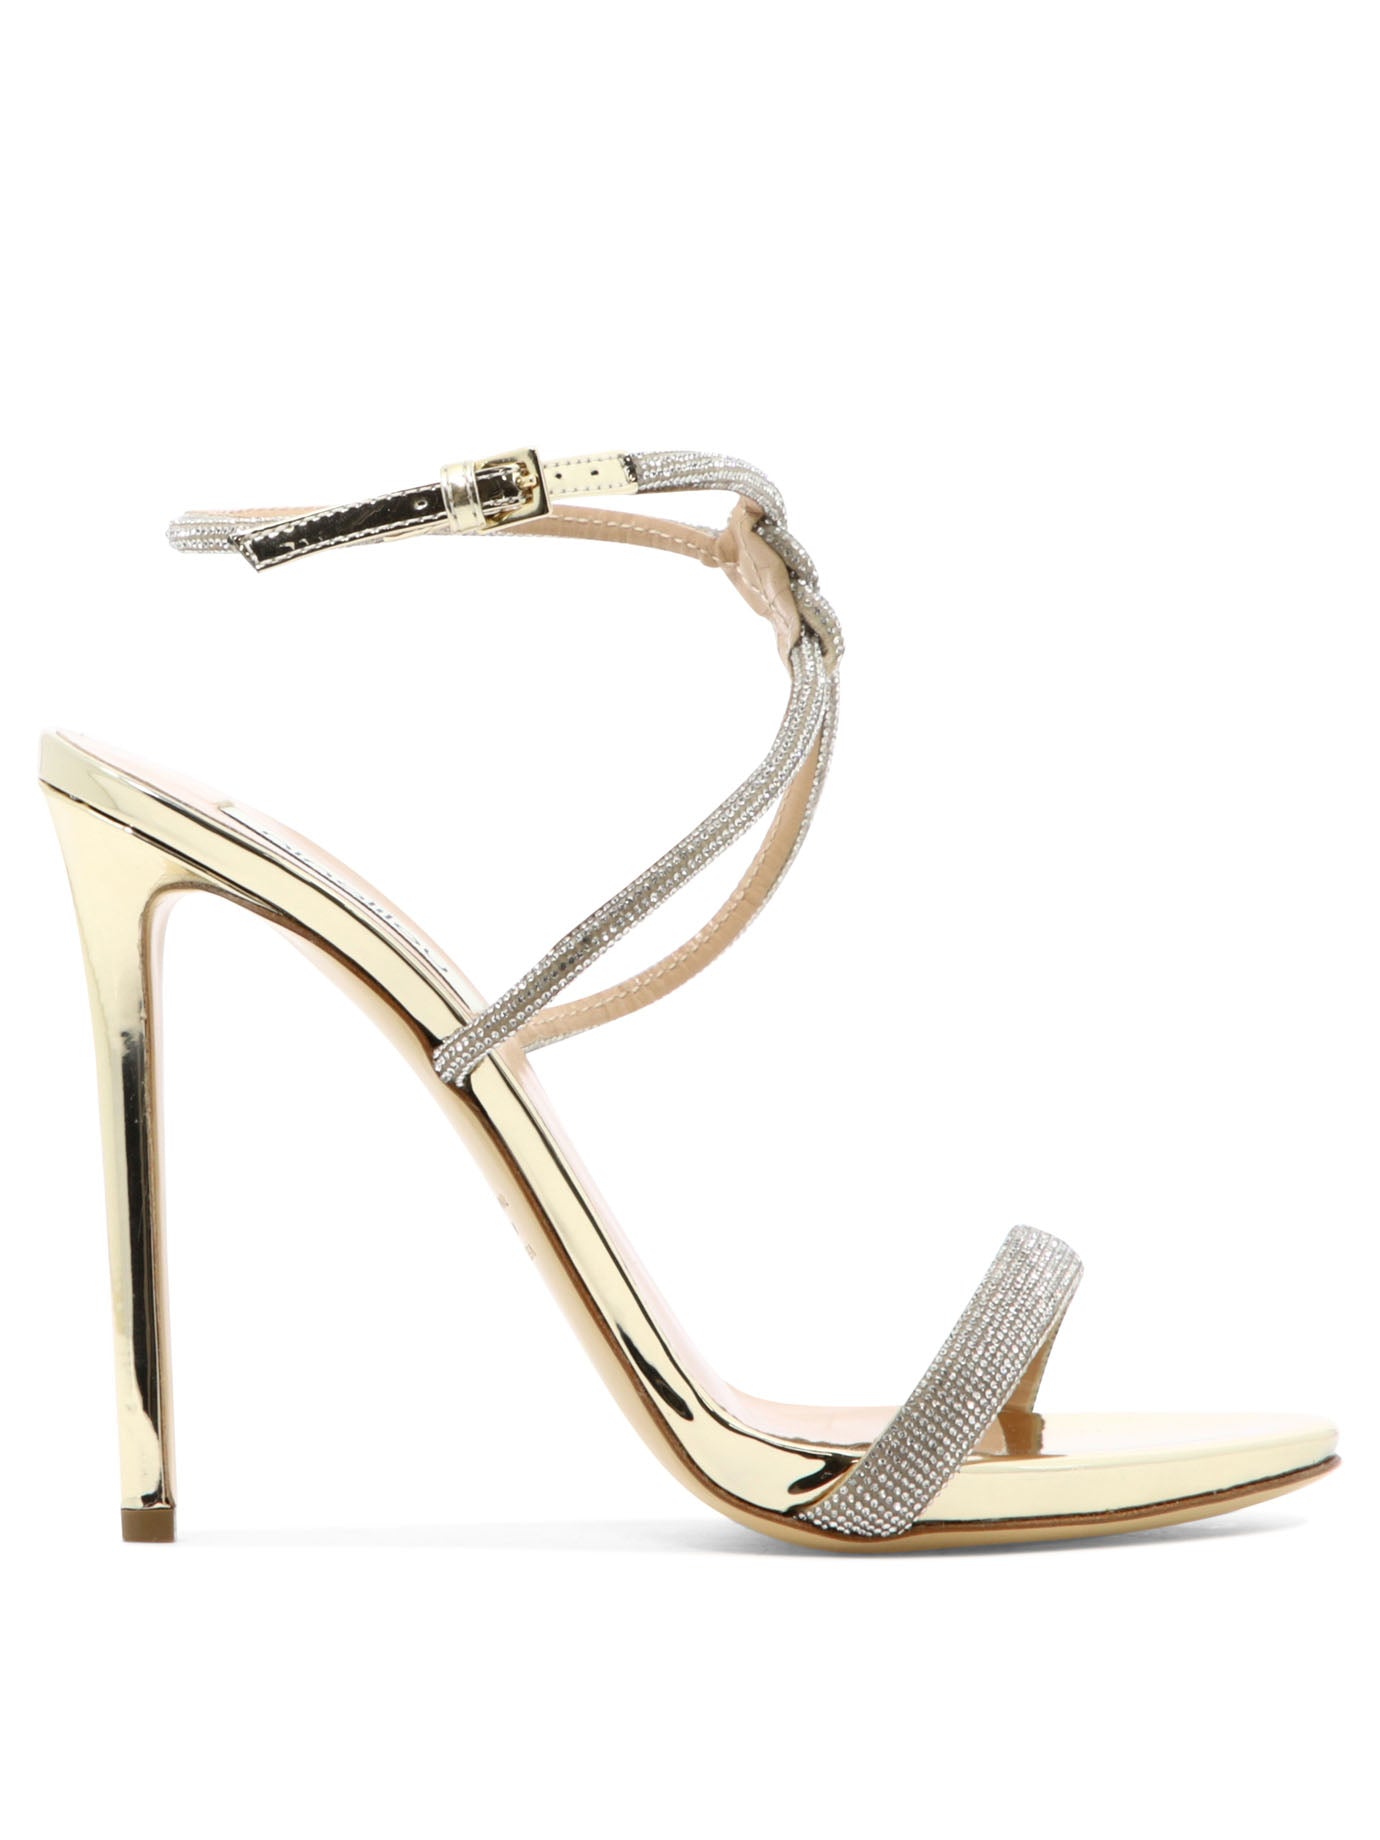 Ninalilou Micol 100 Sandals In Gold